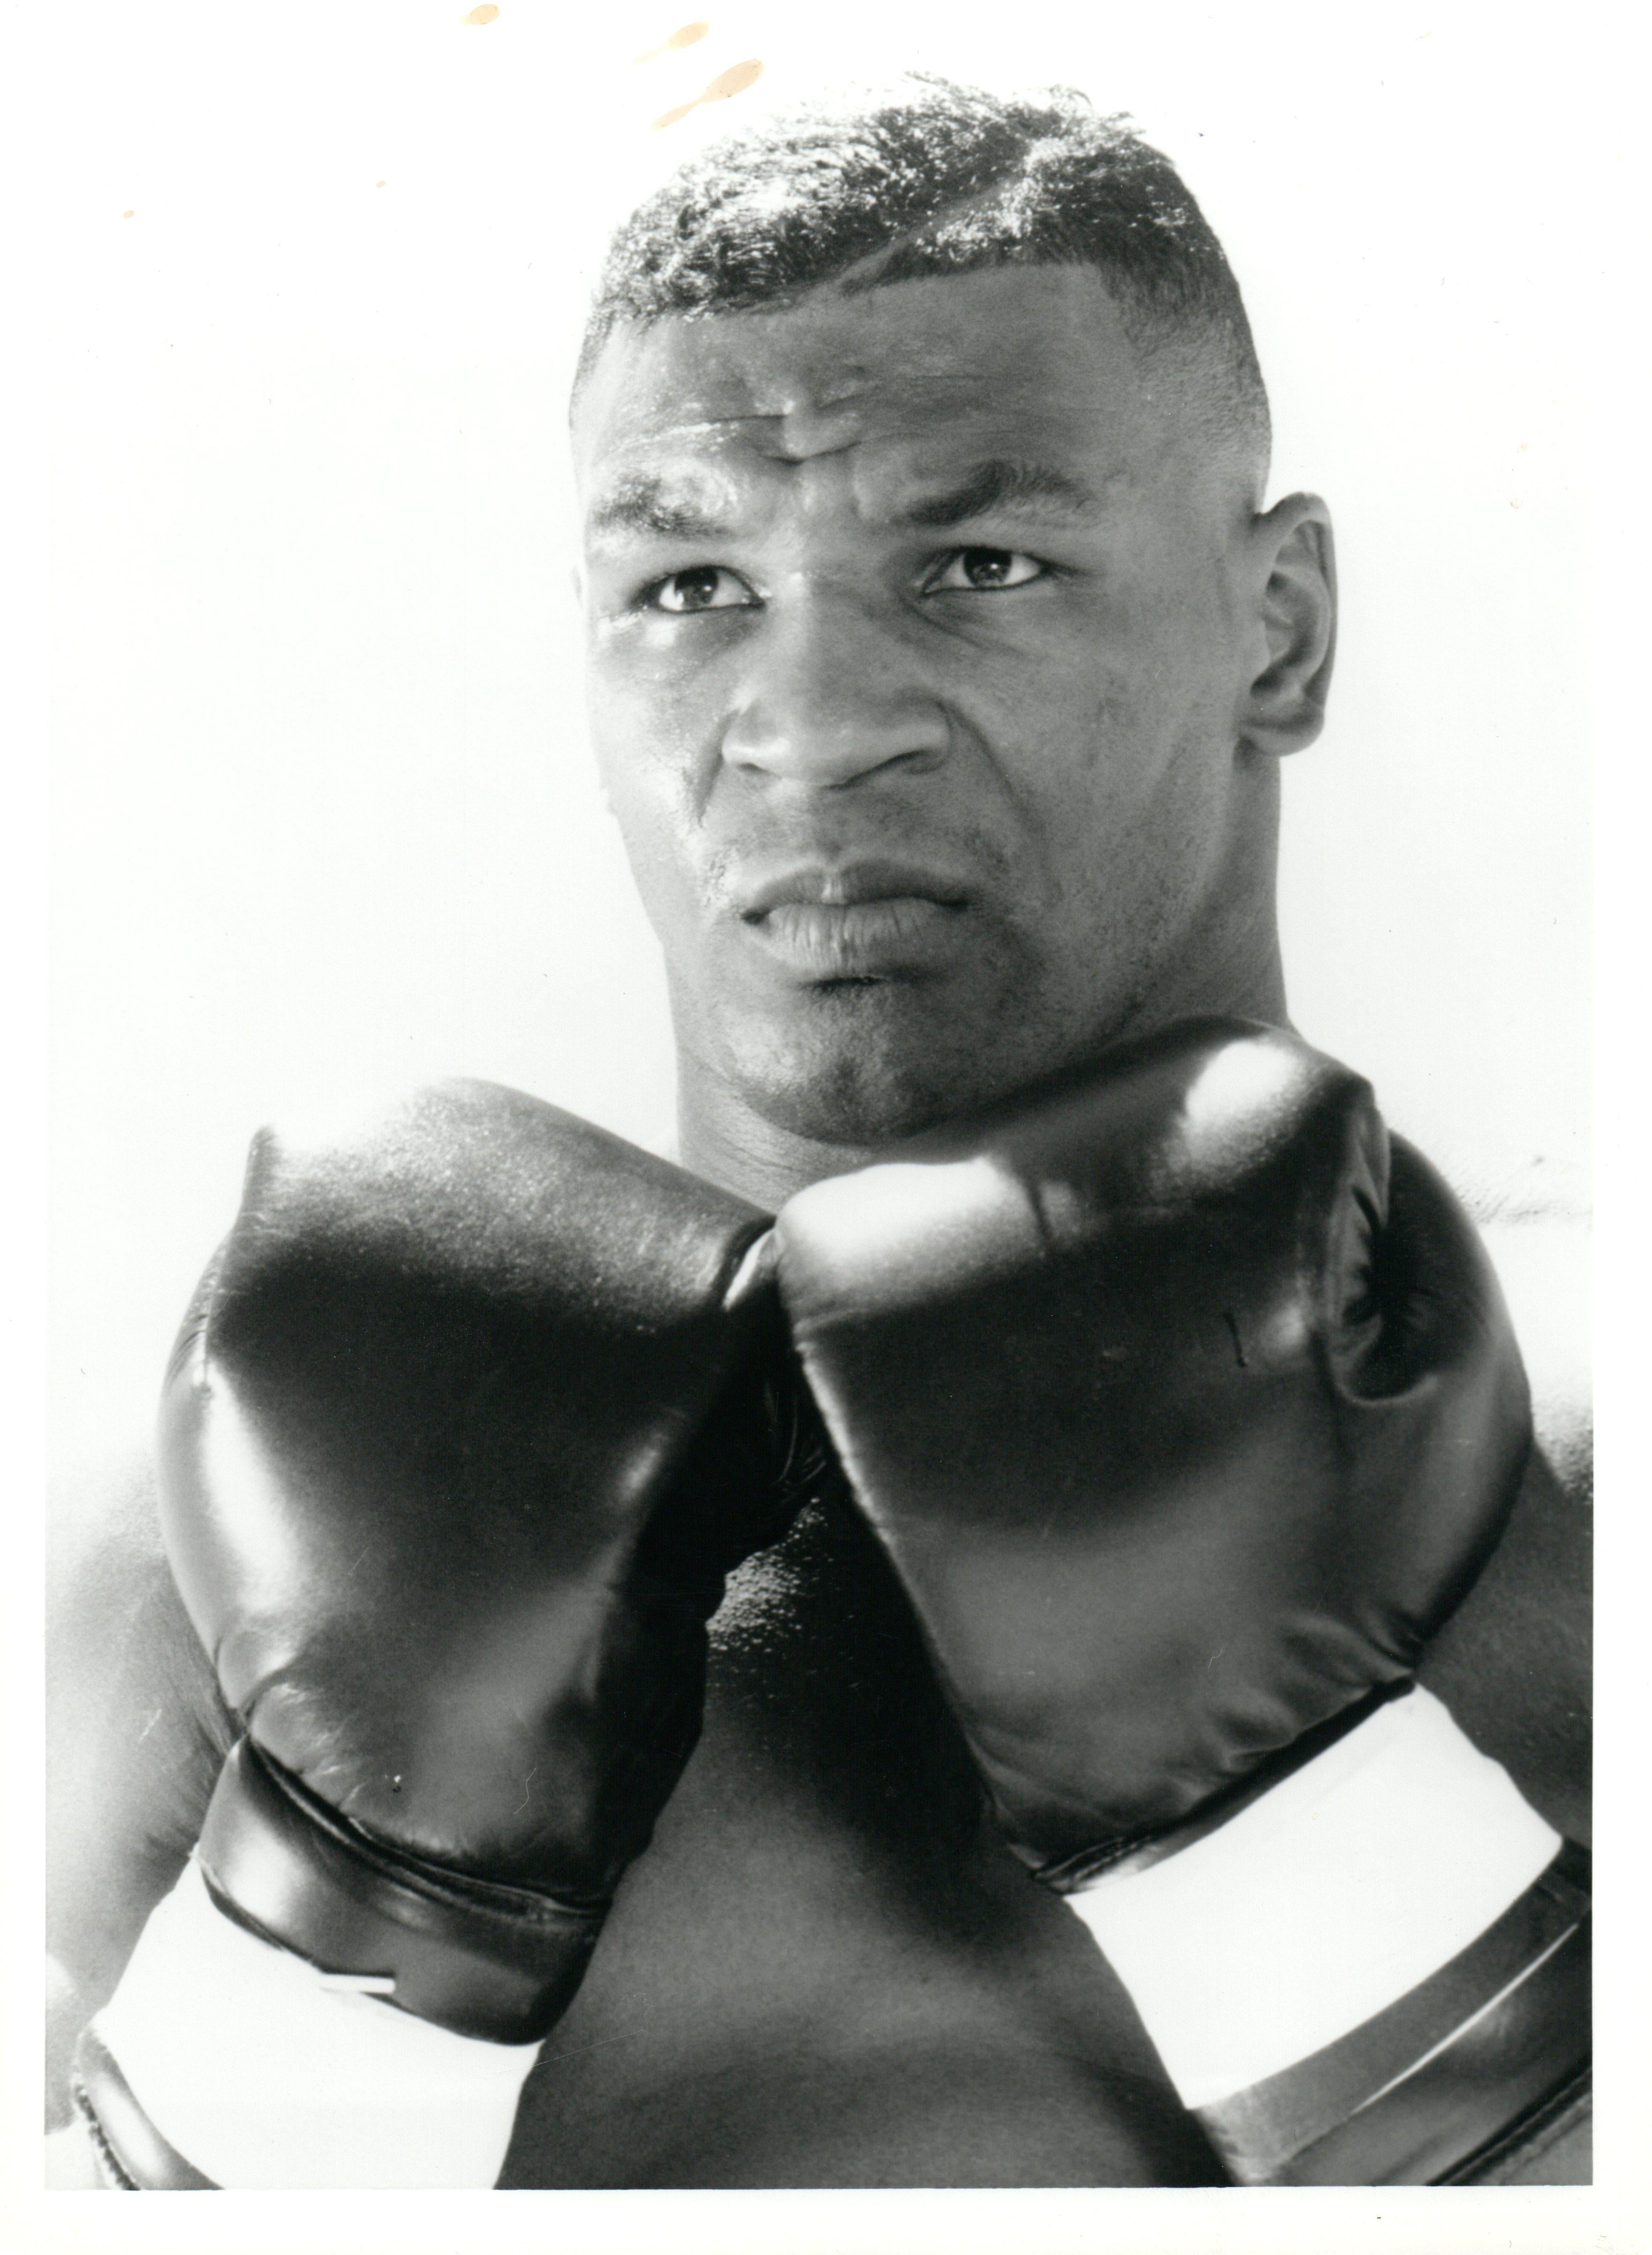 John Paschall Black and White Photograph - Mike Tyson in Boxing Gloves Vintage Original Photograph